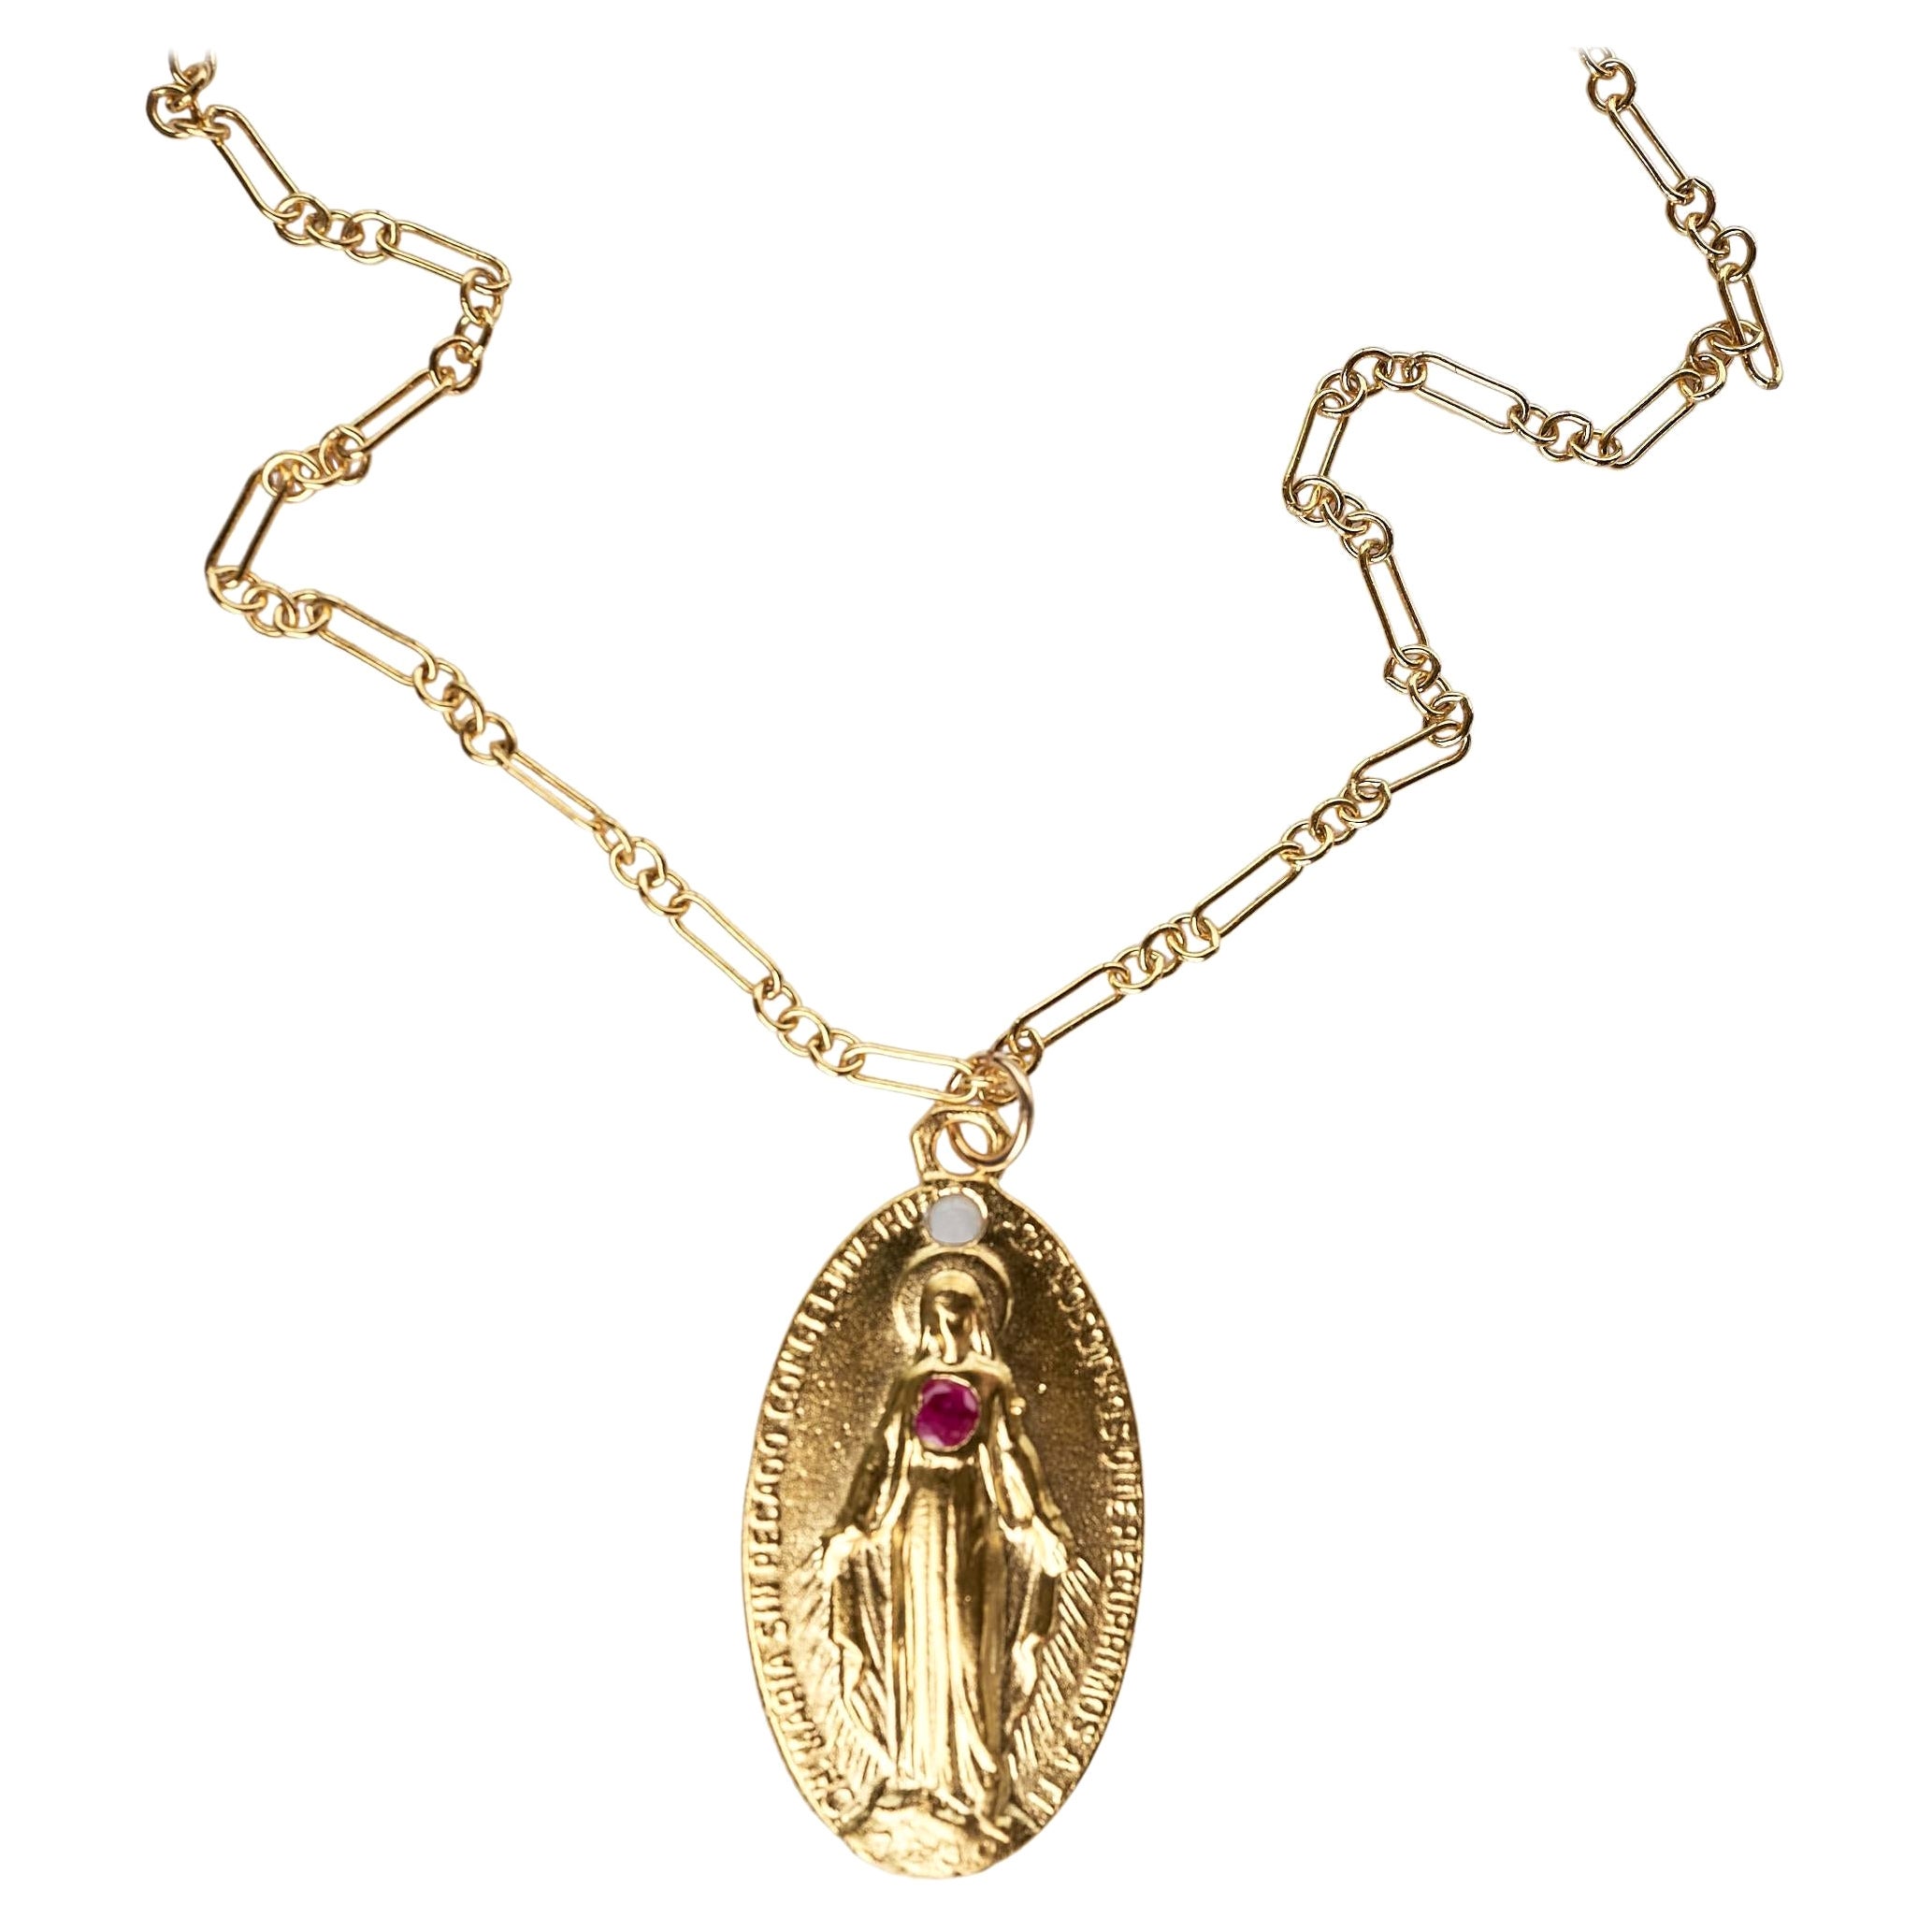 Ruby Opal Medal Virgin Mary Chain Necklace J Dauphin